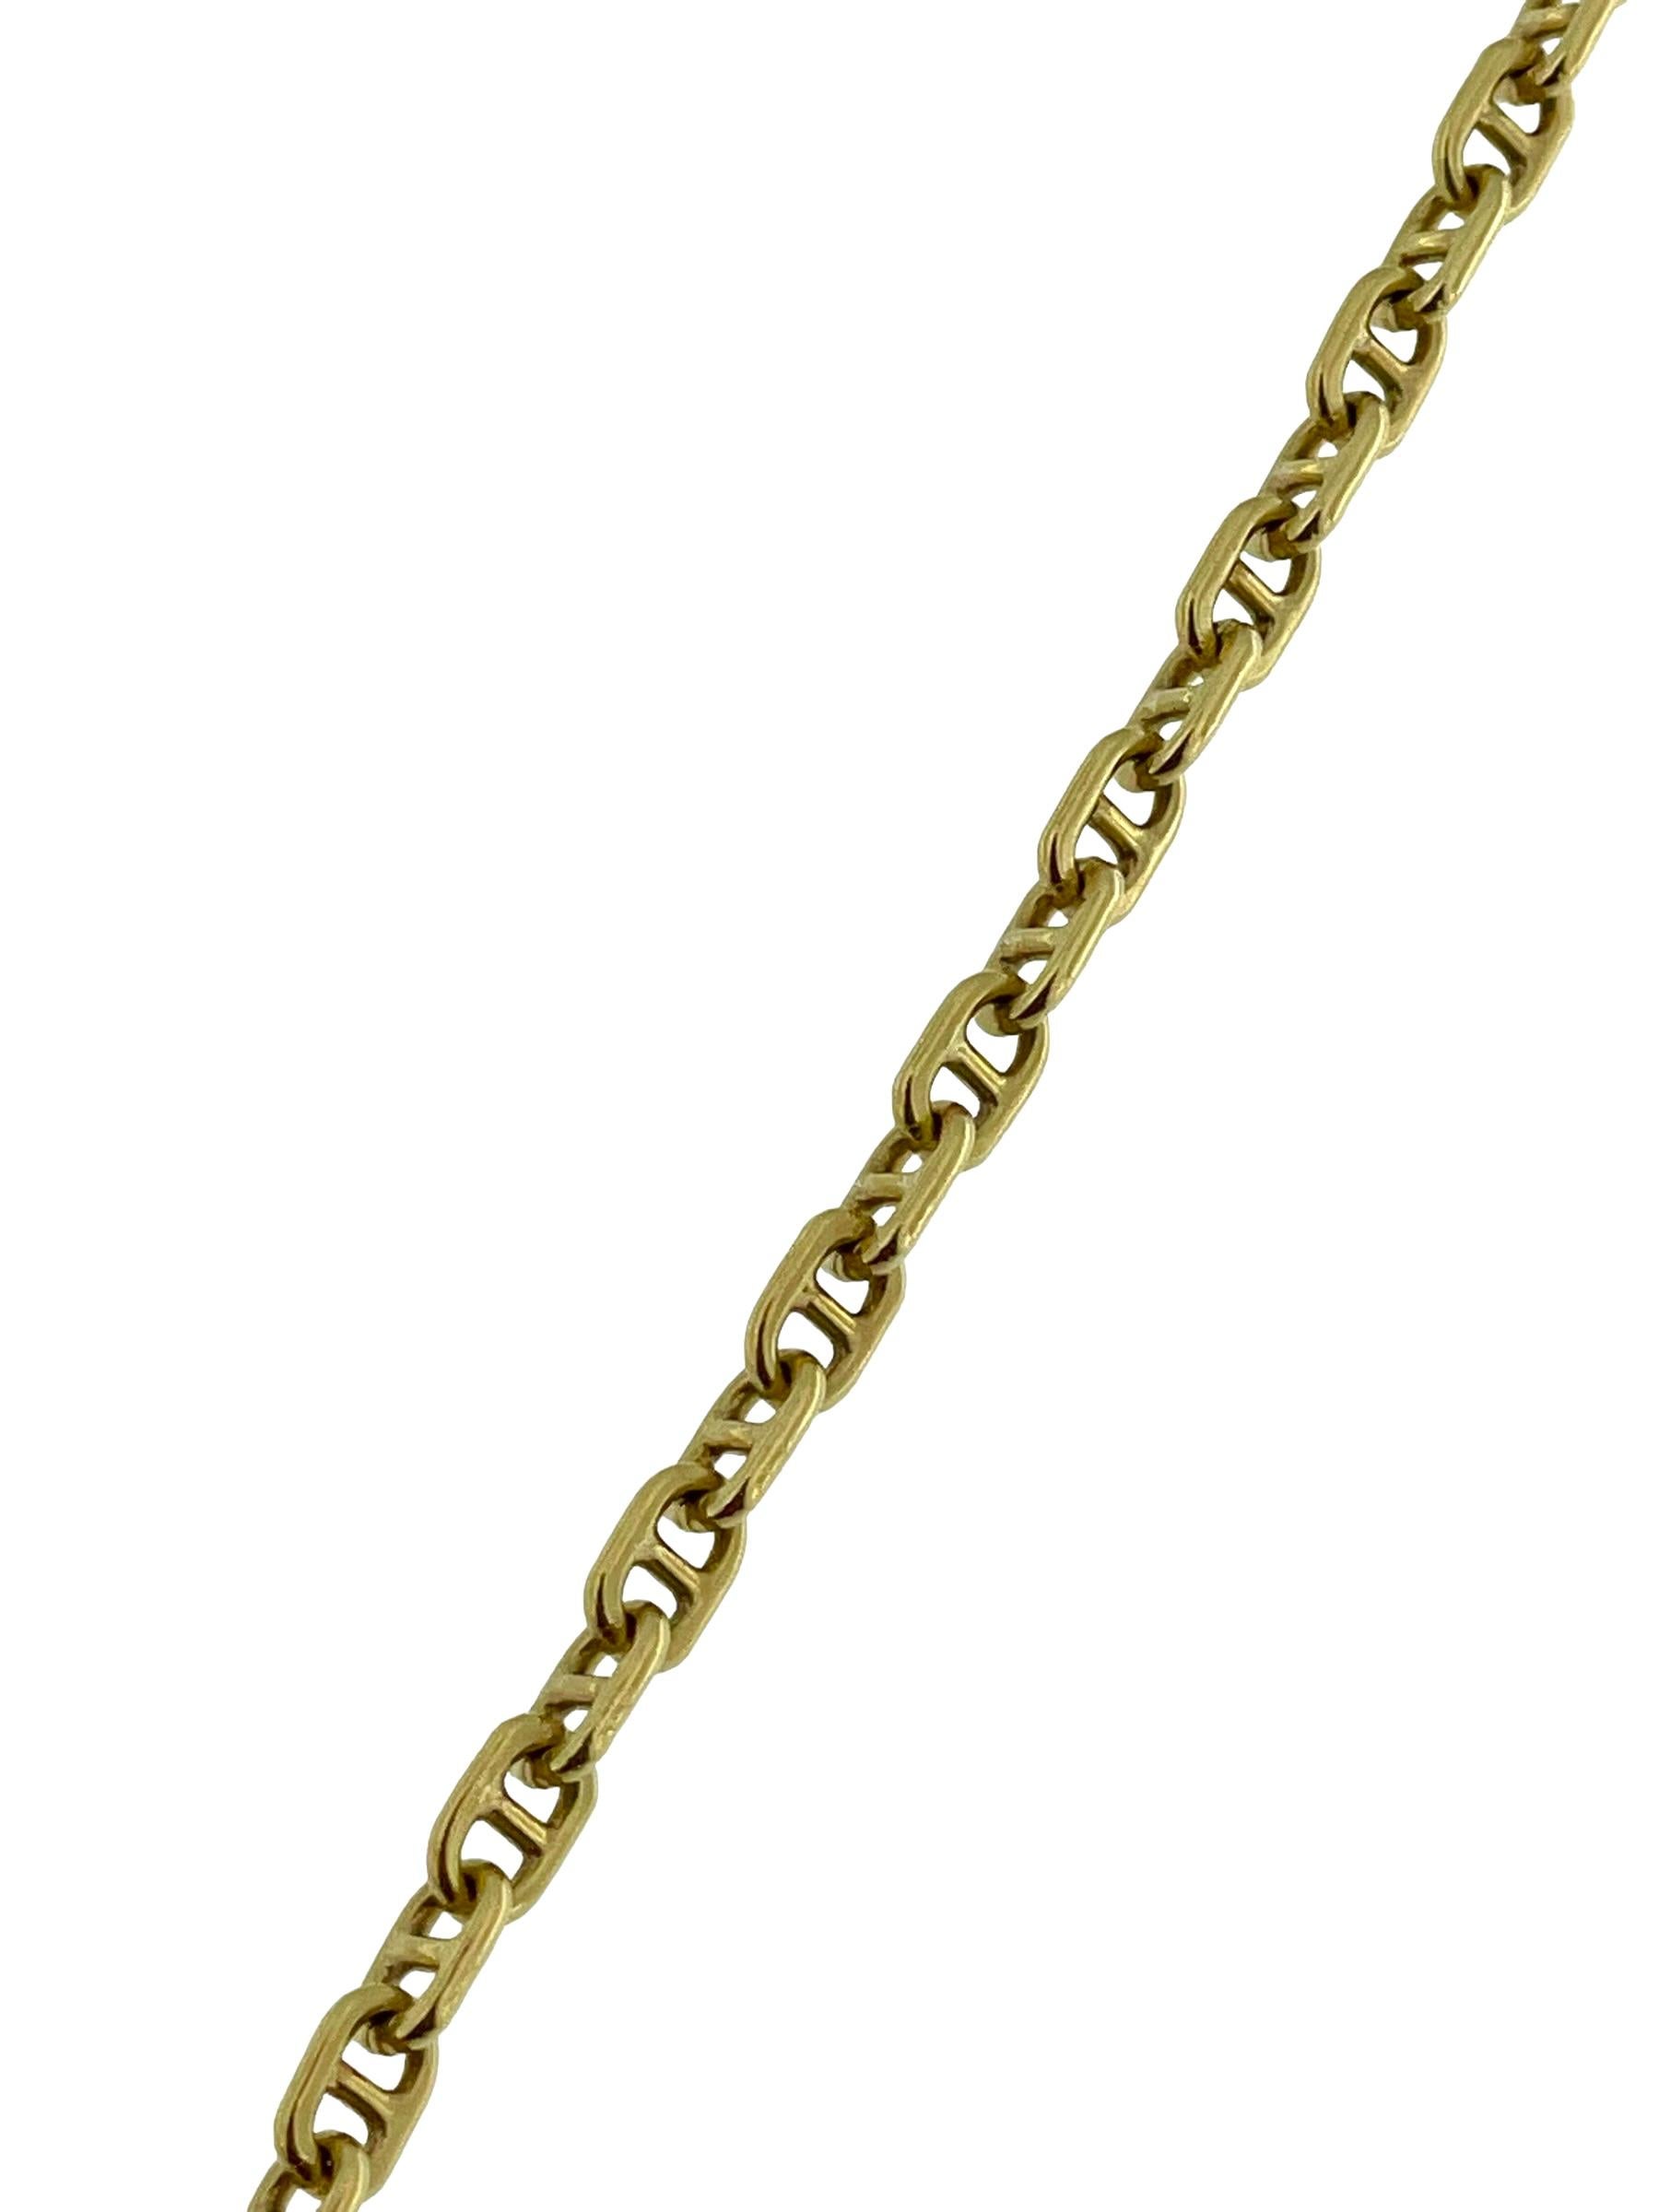 Contemporary Italian Mariner Link Chain Yellow Gold by Balestra For Sale